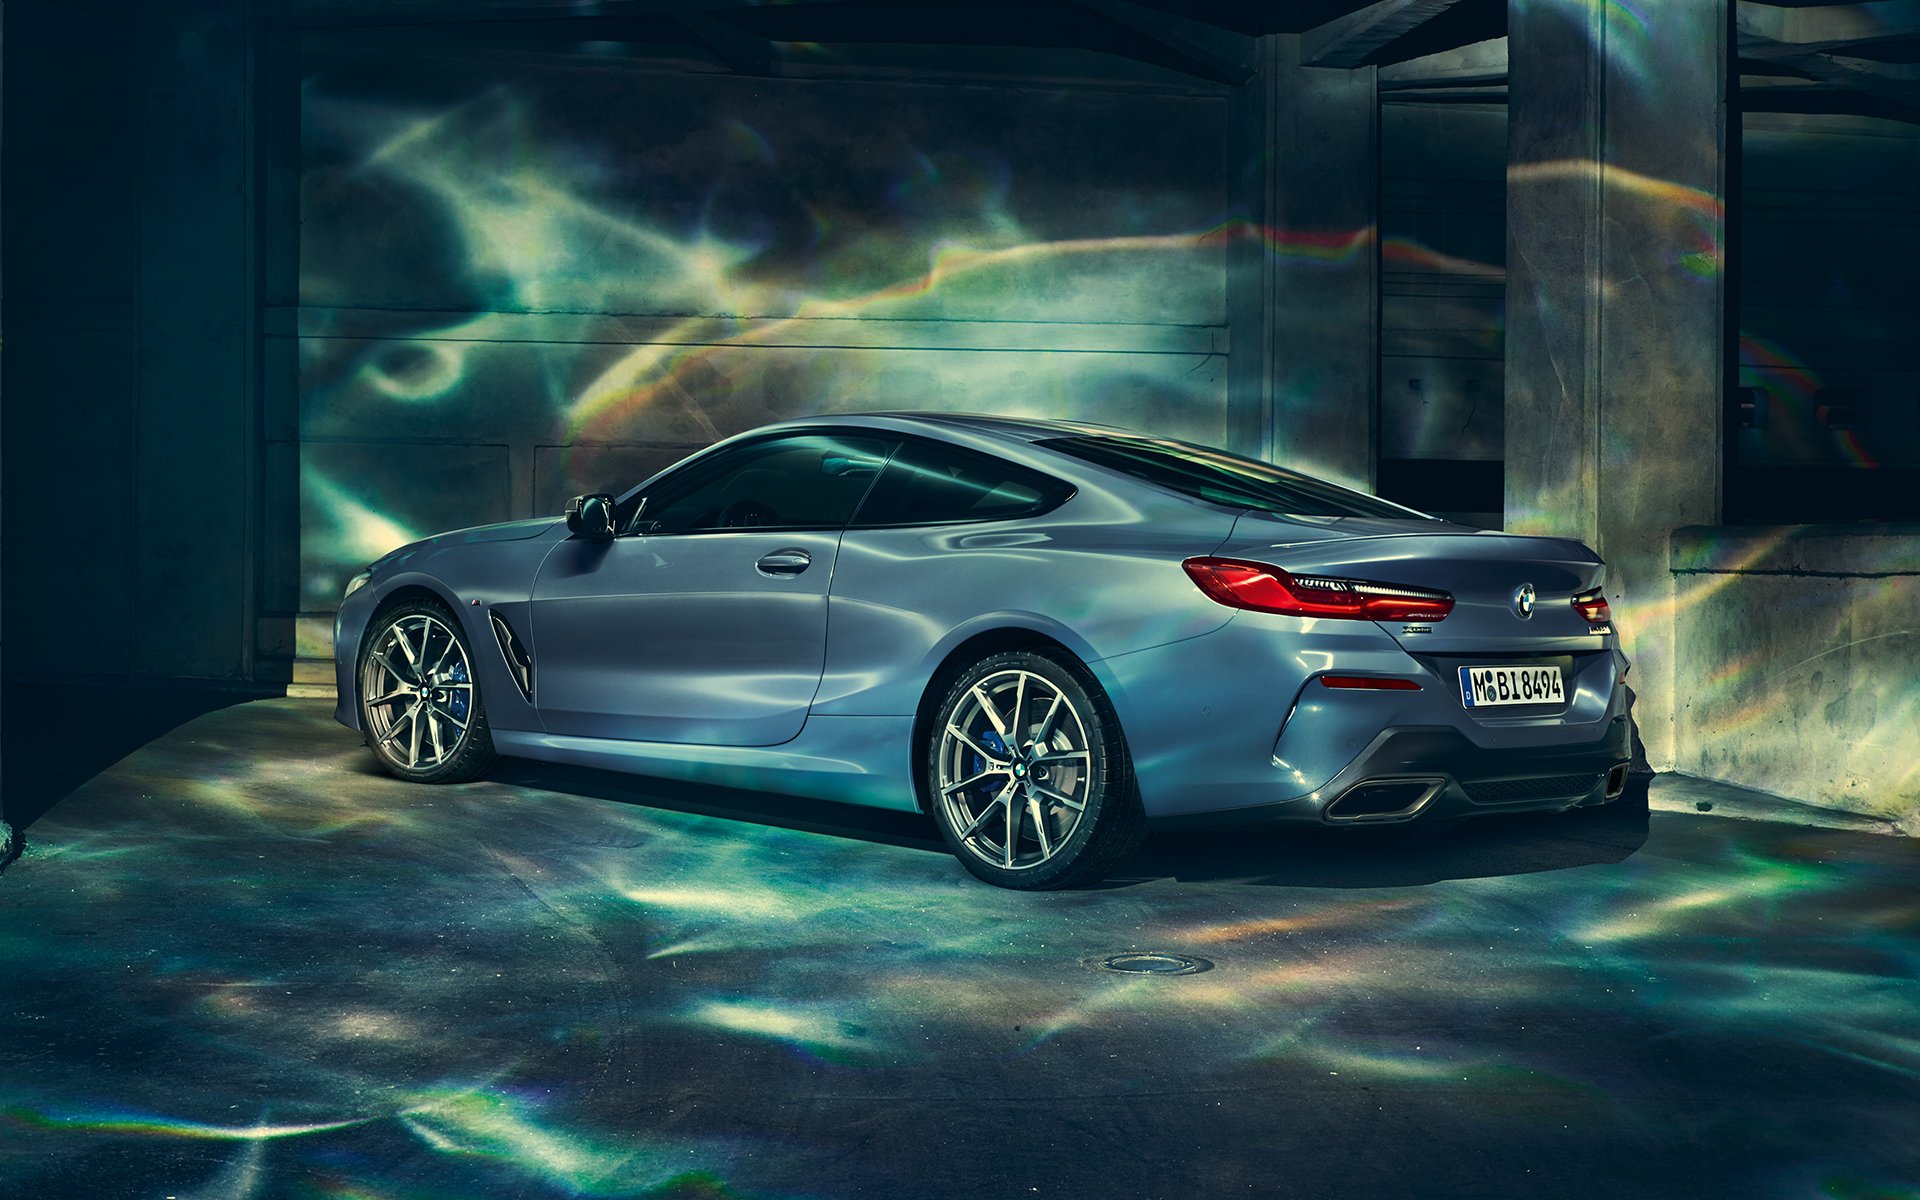 THE 8: Image & Videos of the BMW 8 Series Coupé